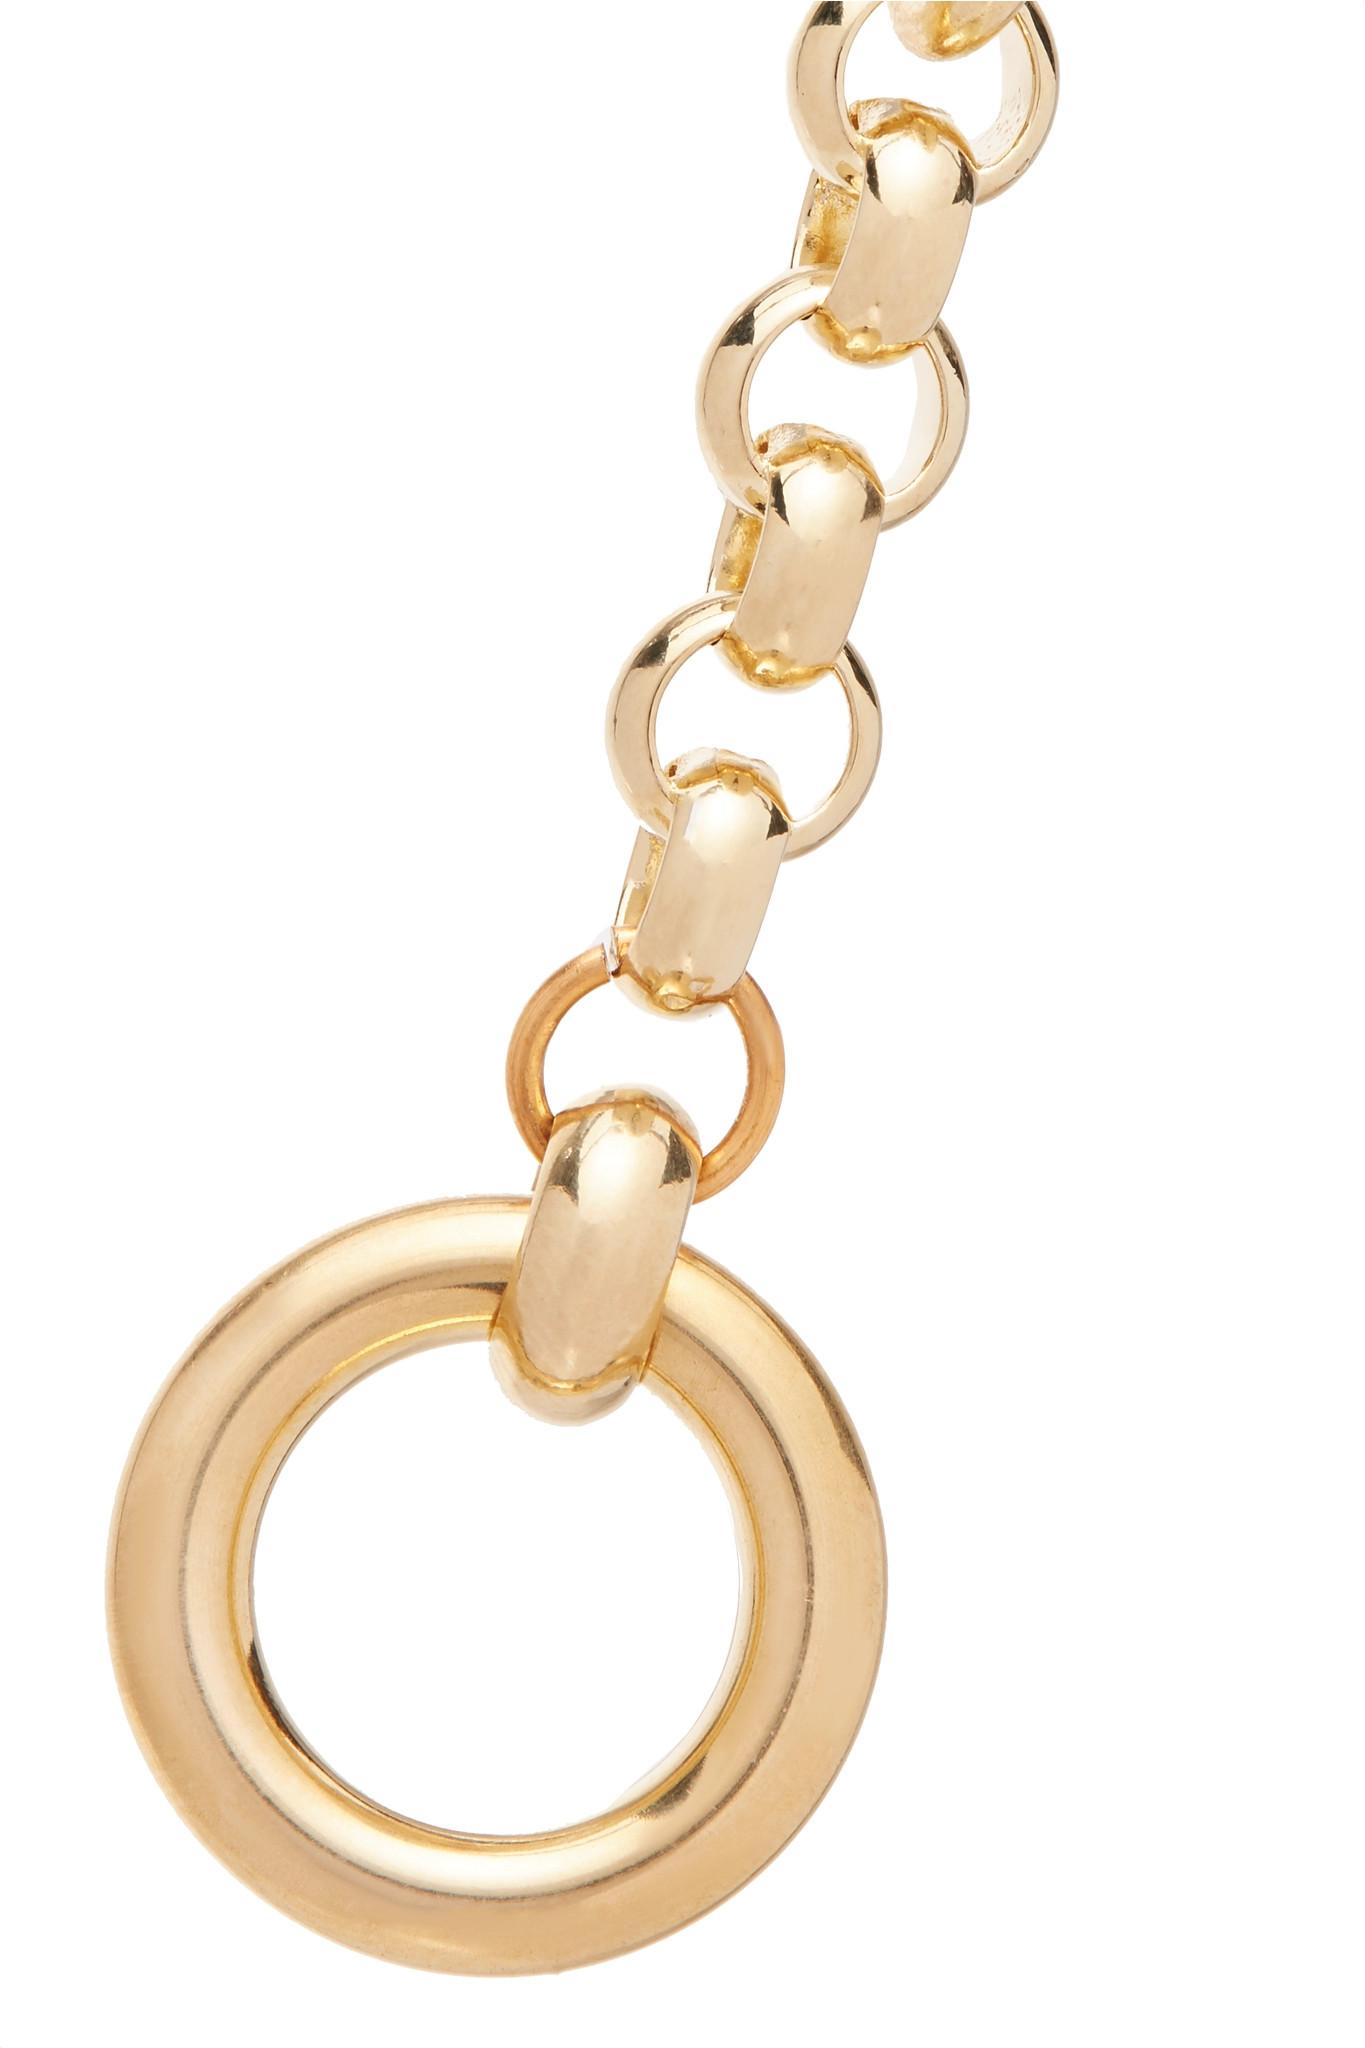 Lyst - Laura Lombardi Rina Gold-plated Necklace Gold One Size in Metallic